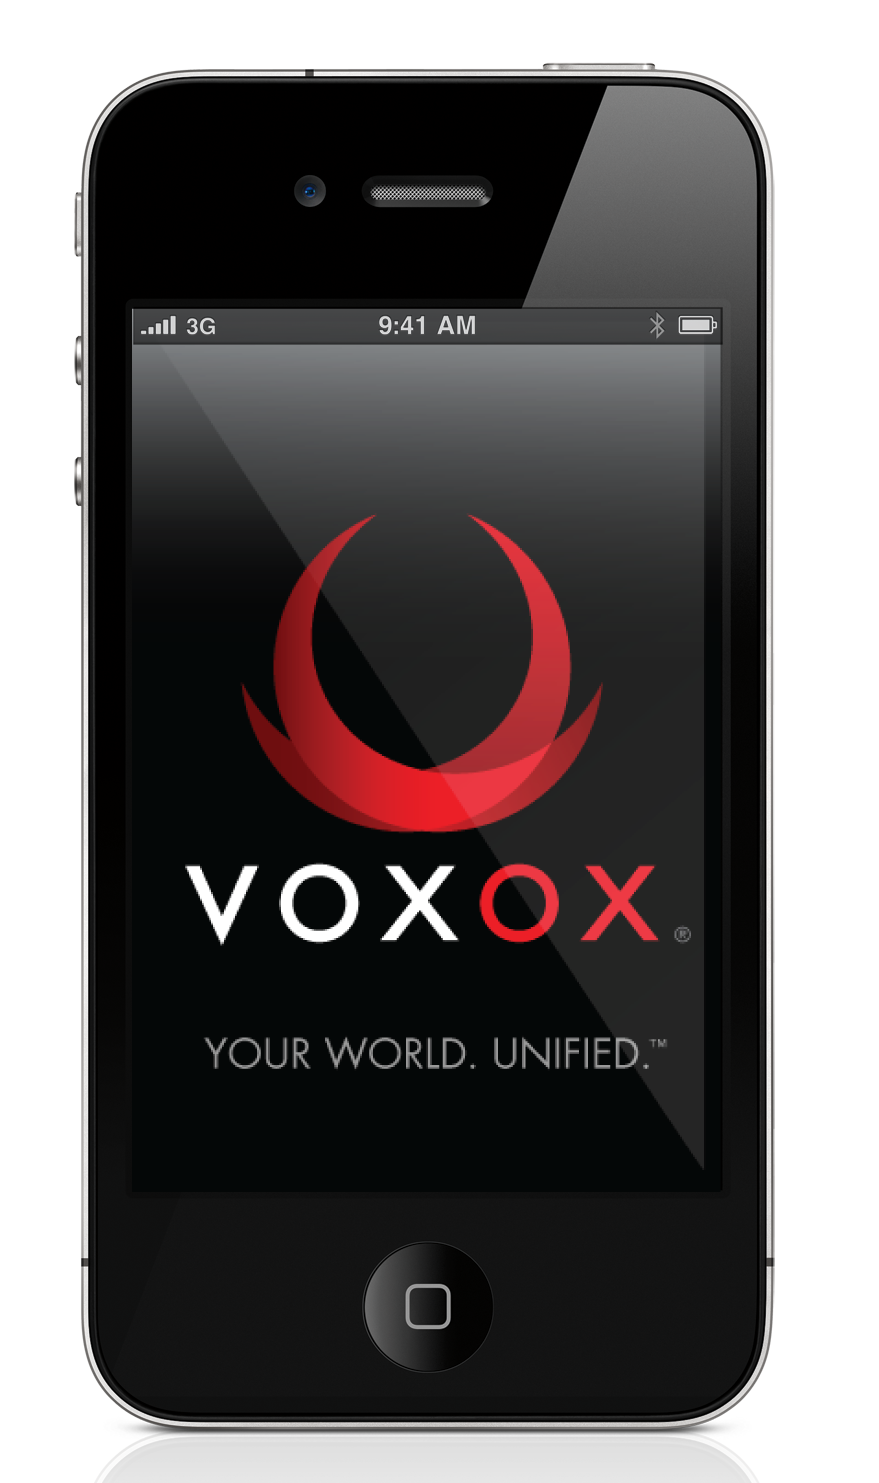 voxox sms rates